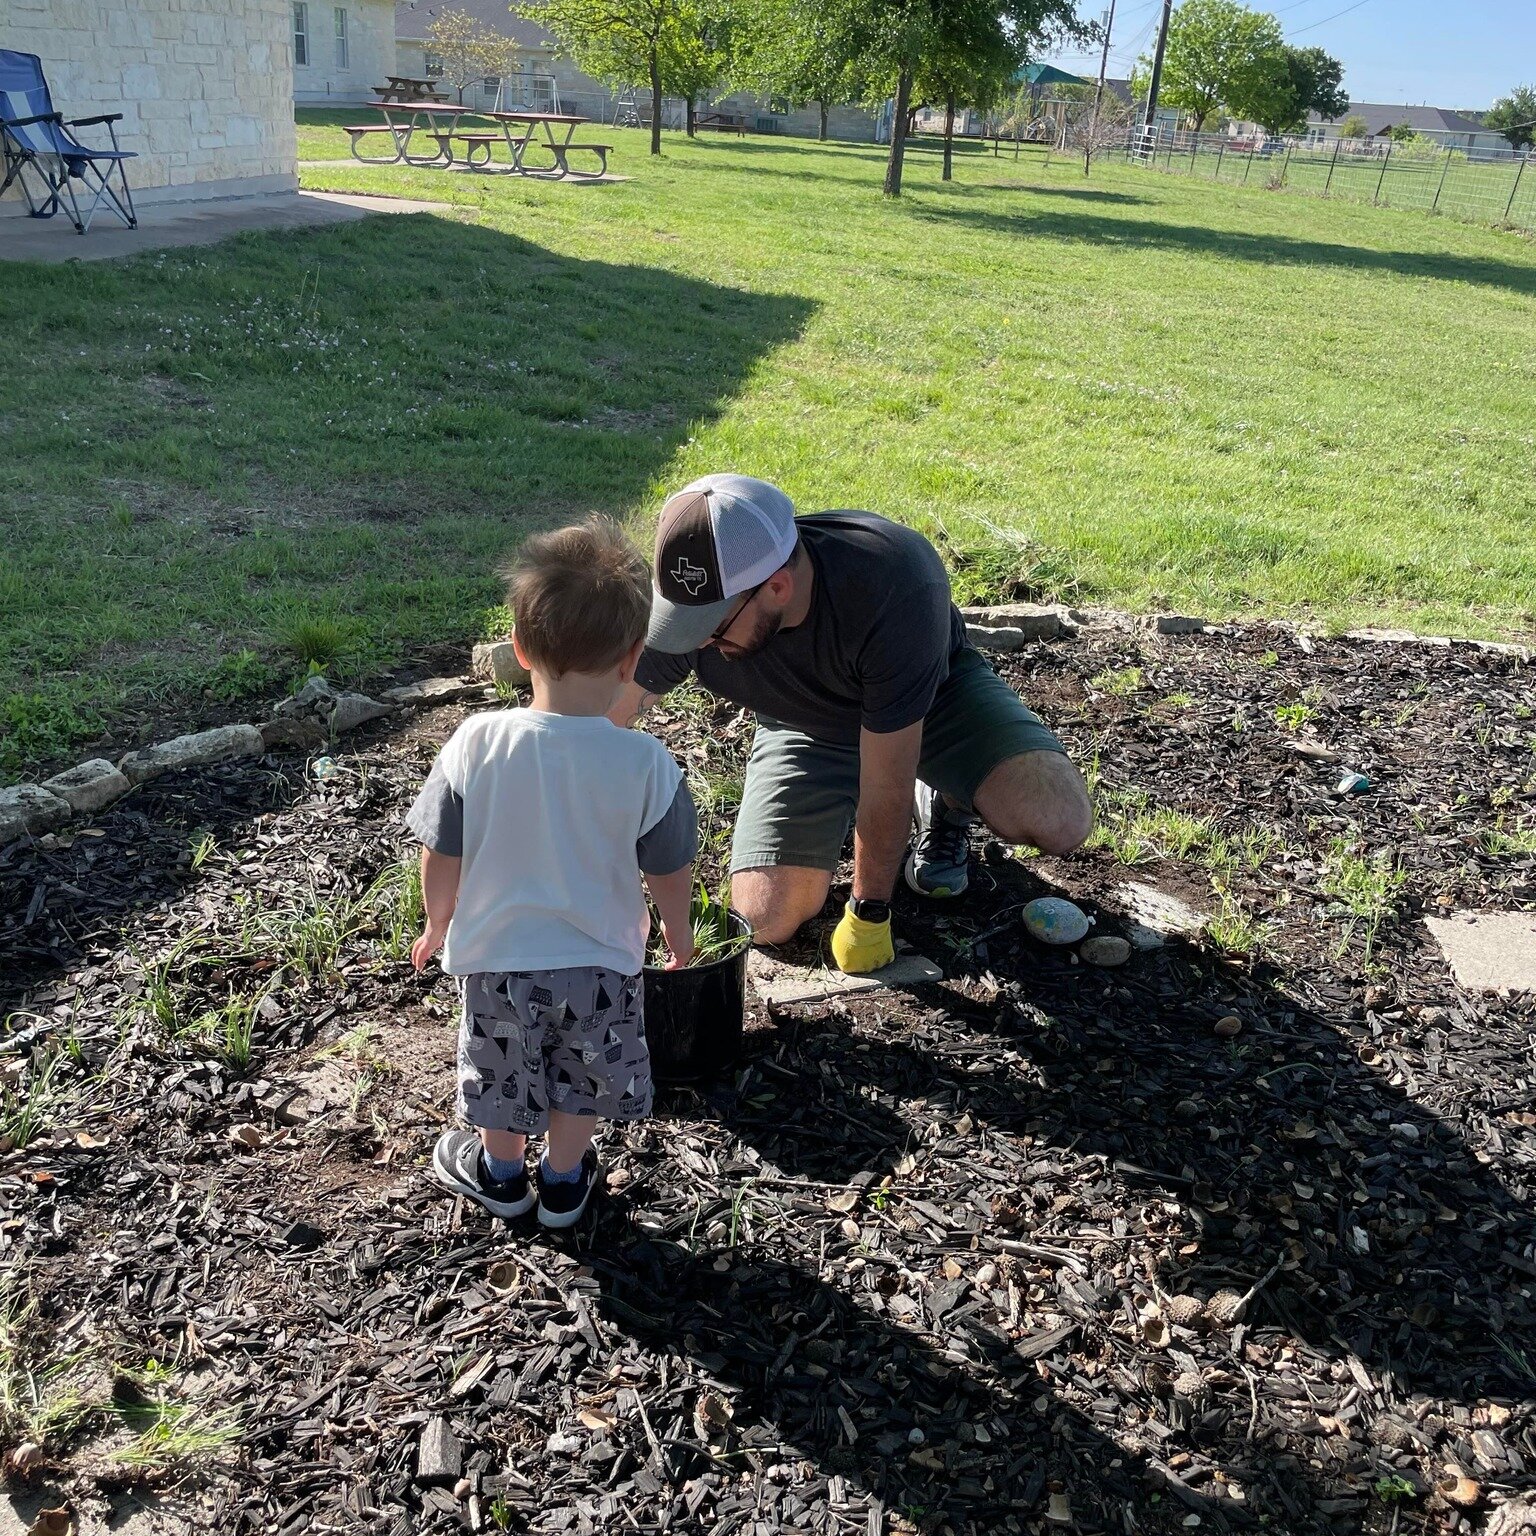 This past Saturday during Family Mission Morning families served at the Texas Baptist Children&rsquo;s Home, cleaning out and planting new plants in the butterfly memorial garden! Thanks everyone who came out and served!